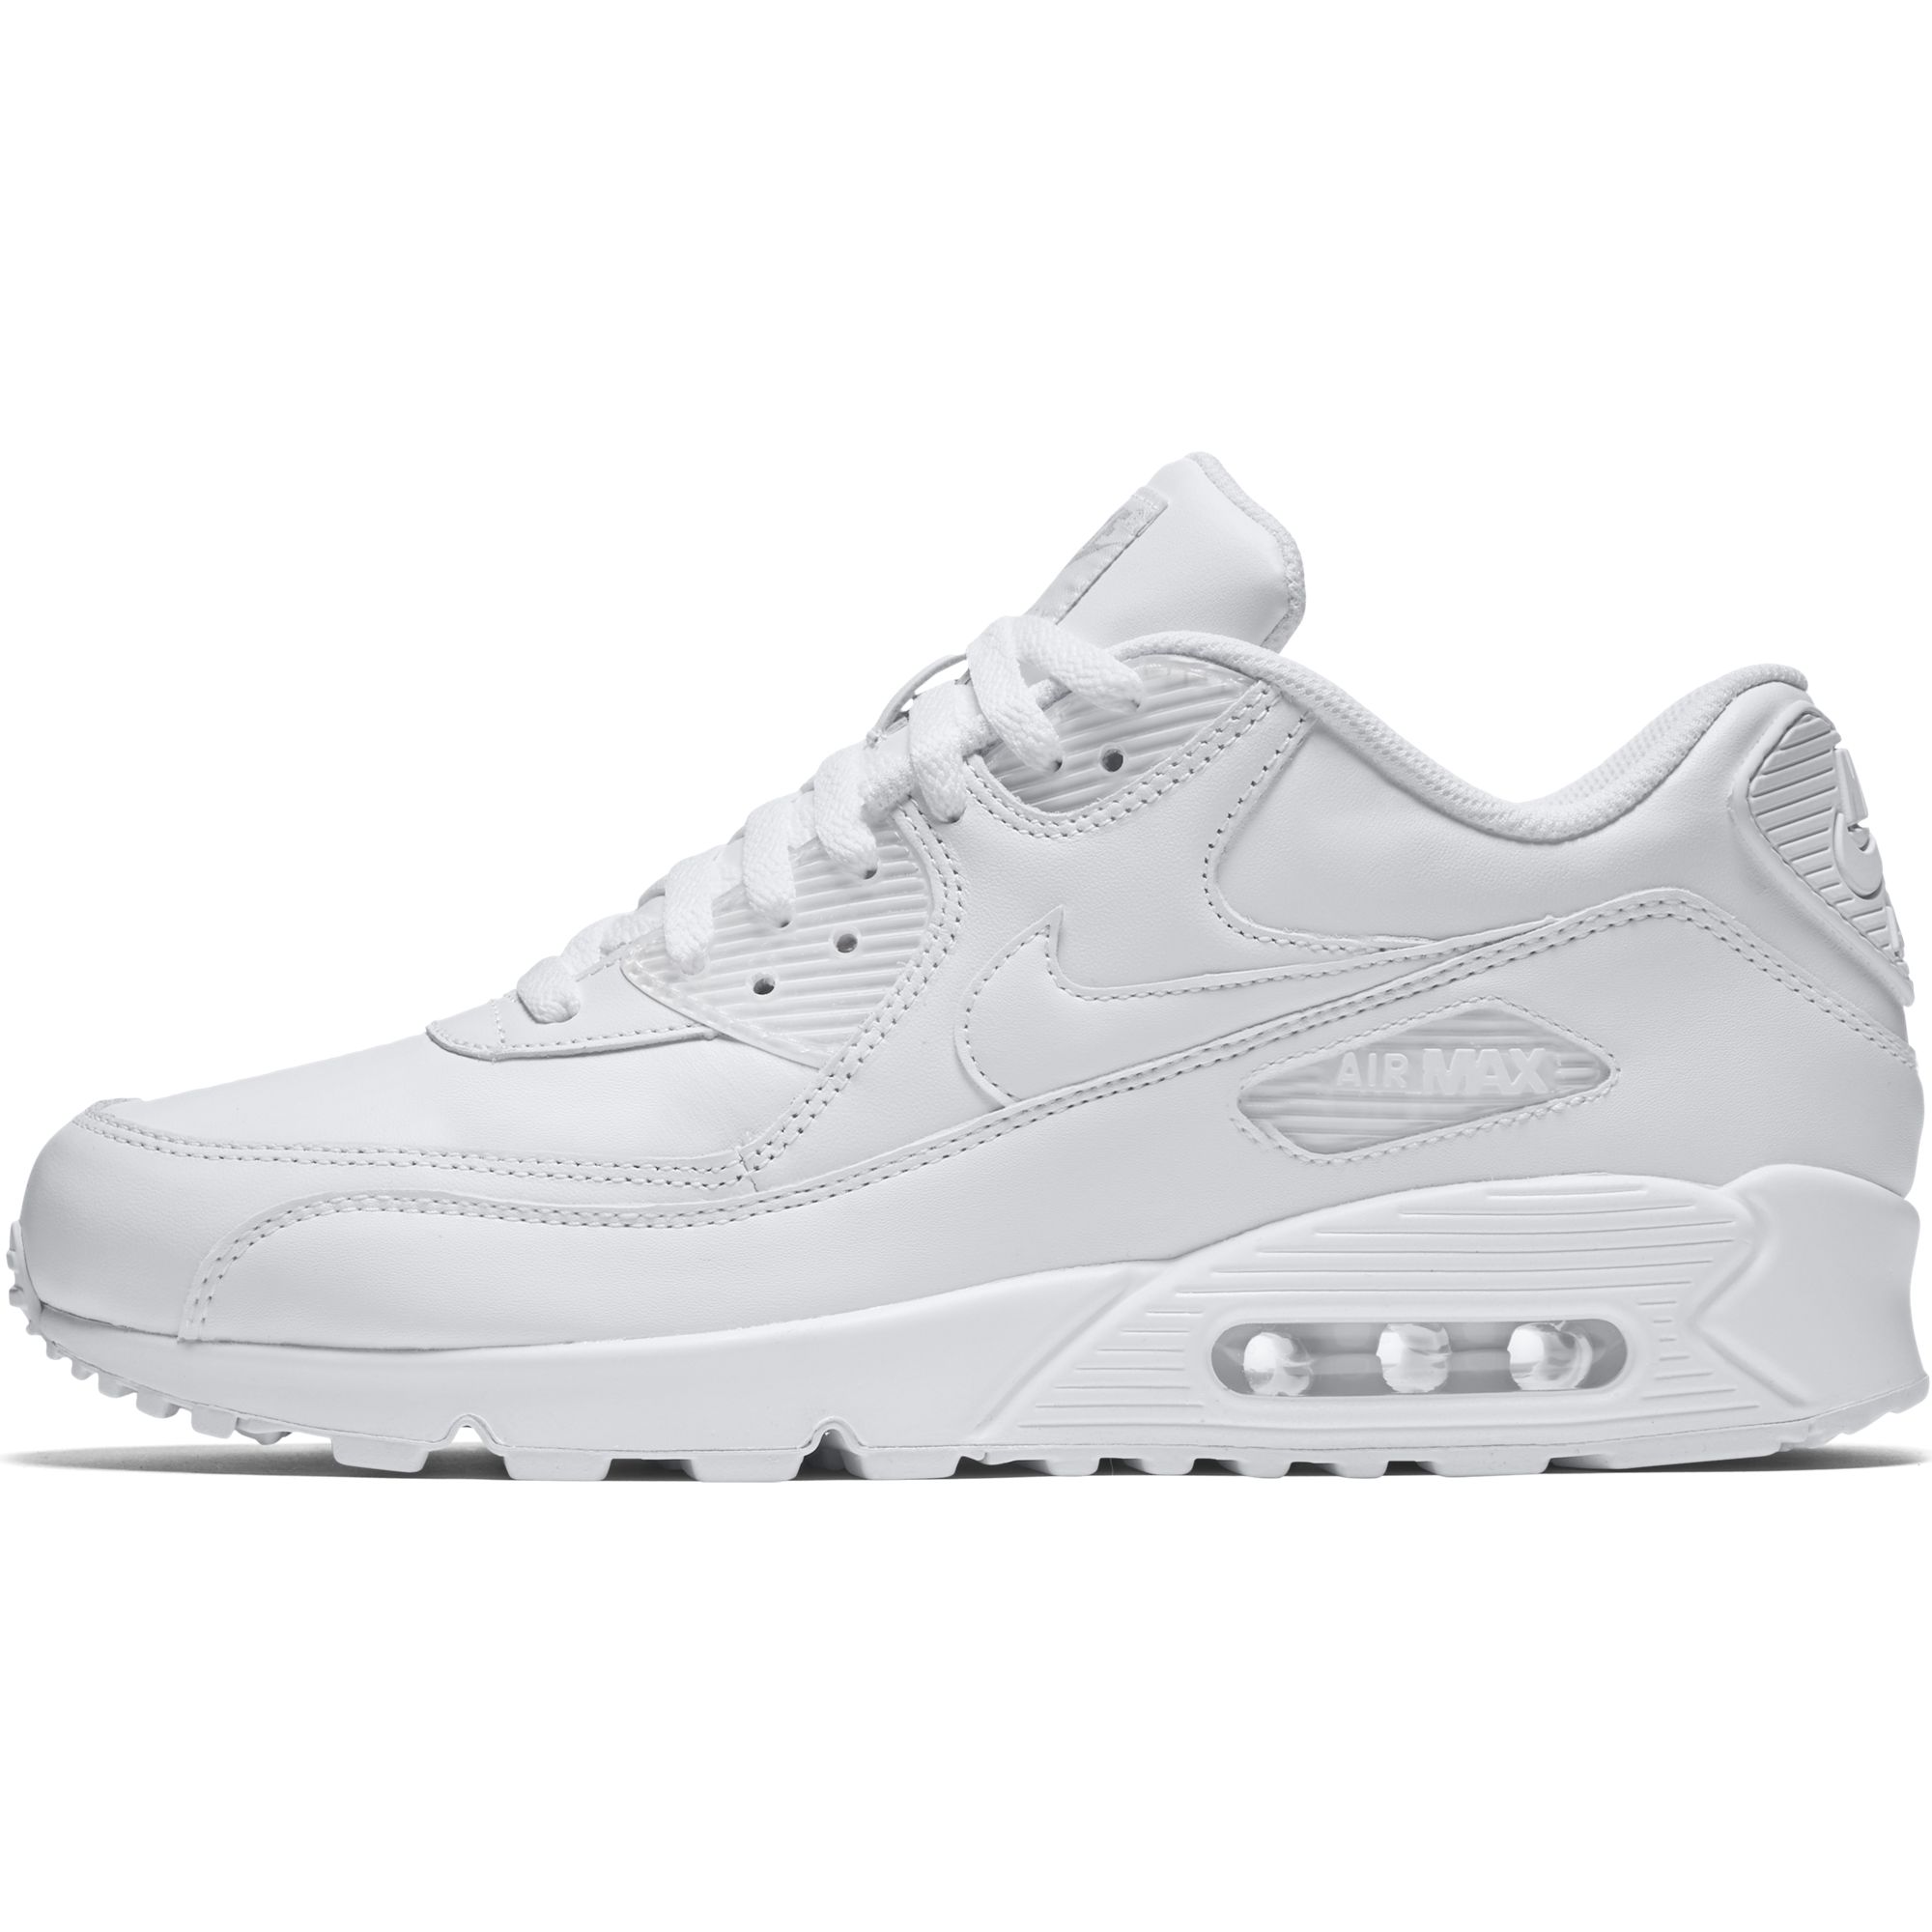 Nike Air Max 90 Leather | 302519-113